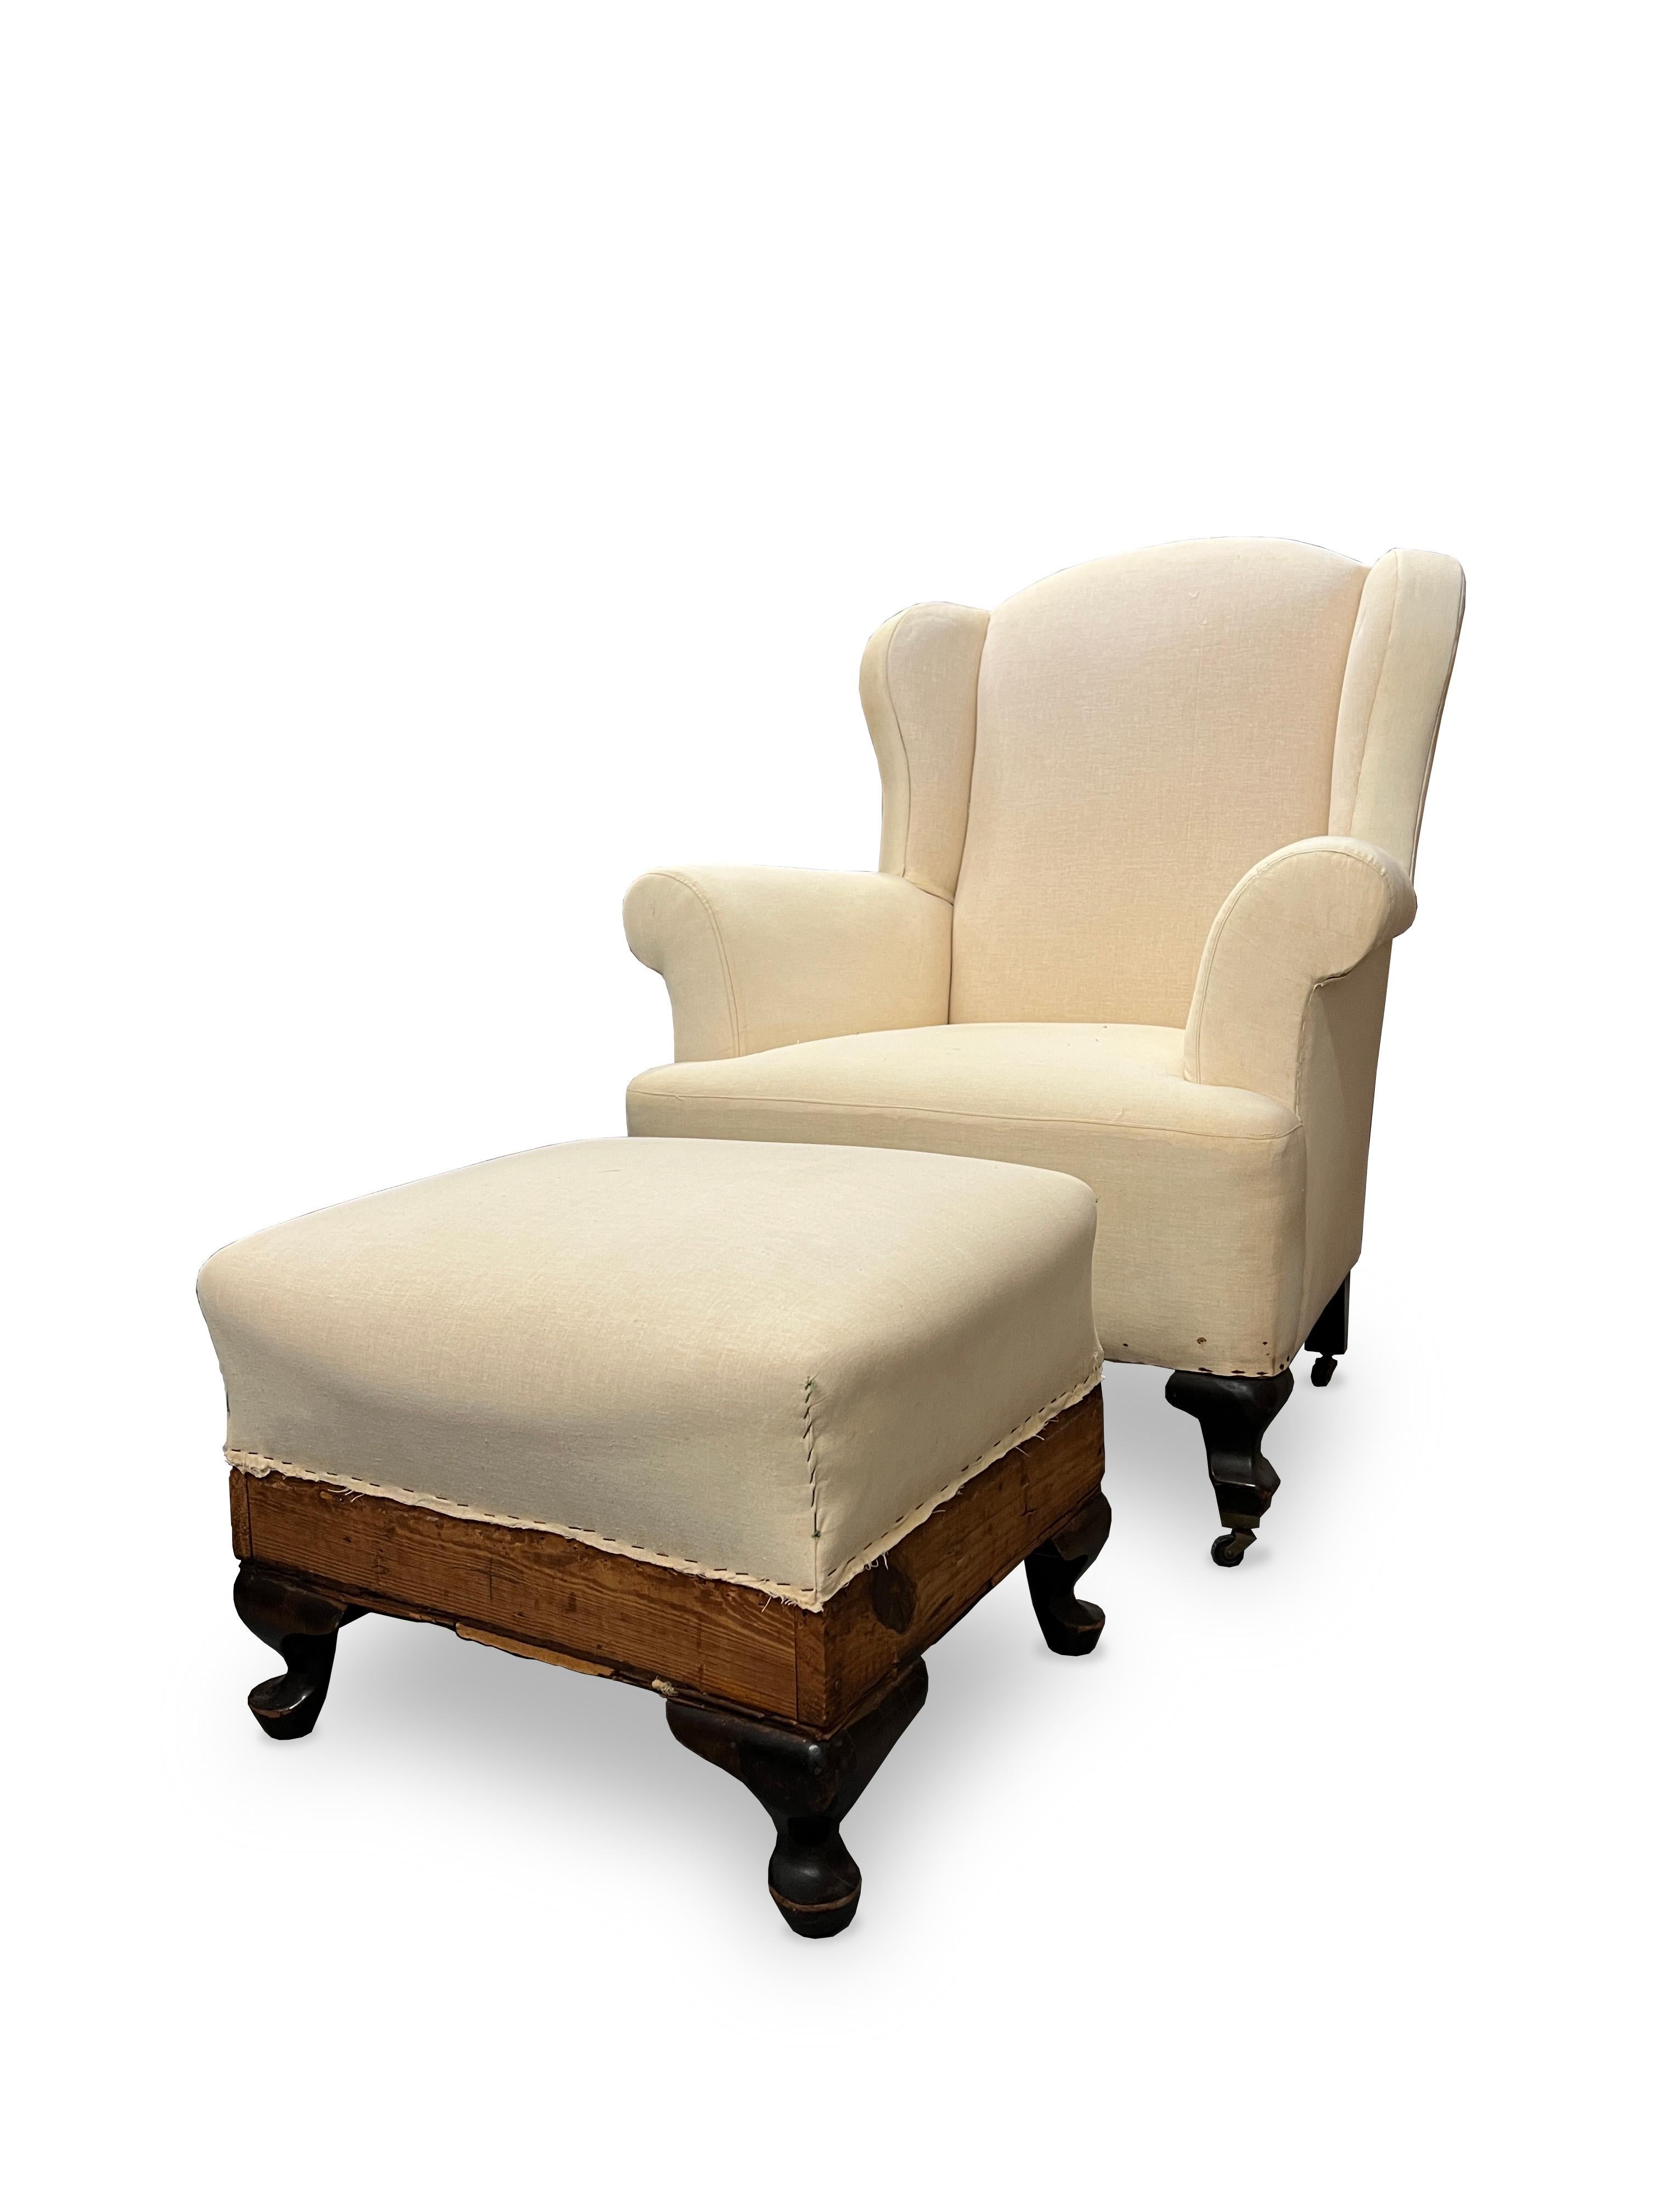 Set of wingback chair upholstered in white fabric paired with upholstered ottoman. This American style armchair has a high back, shaped arms and a cushion seat. These comfortable and stylish pieces look amazing in any setting. The striking large